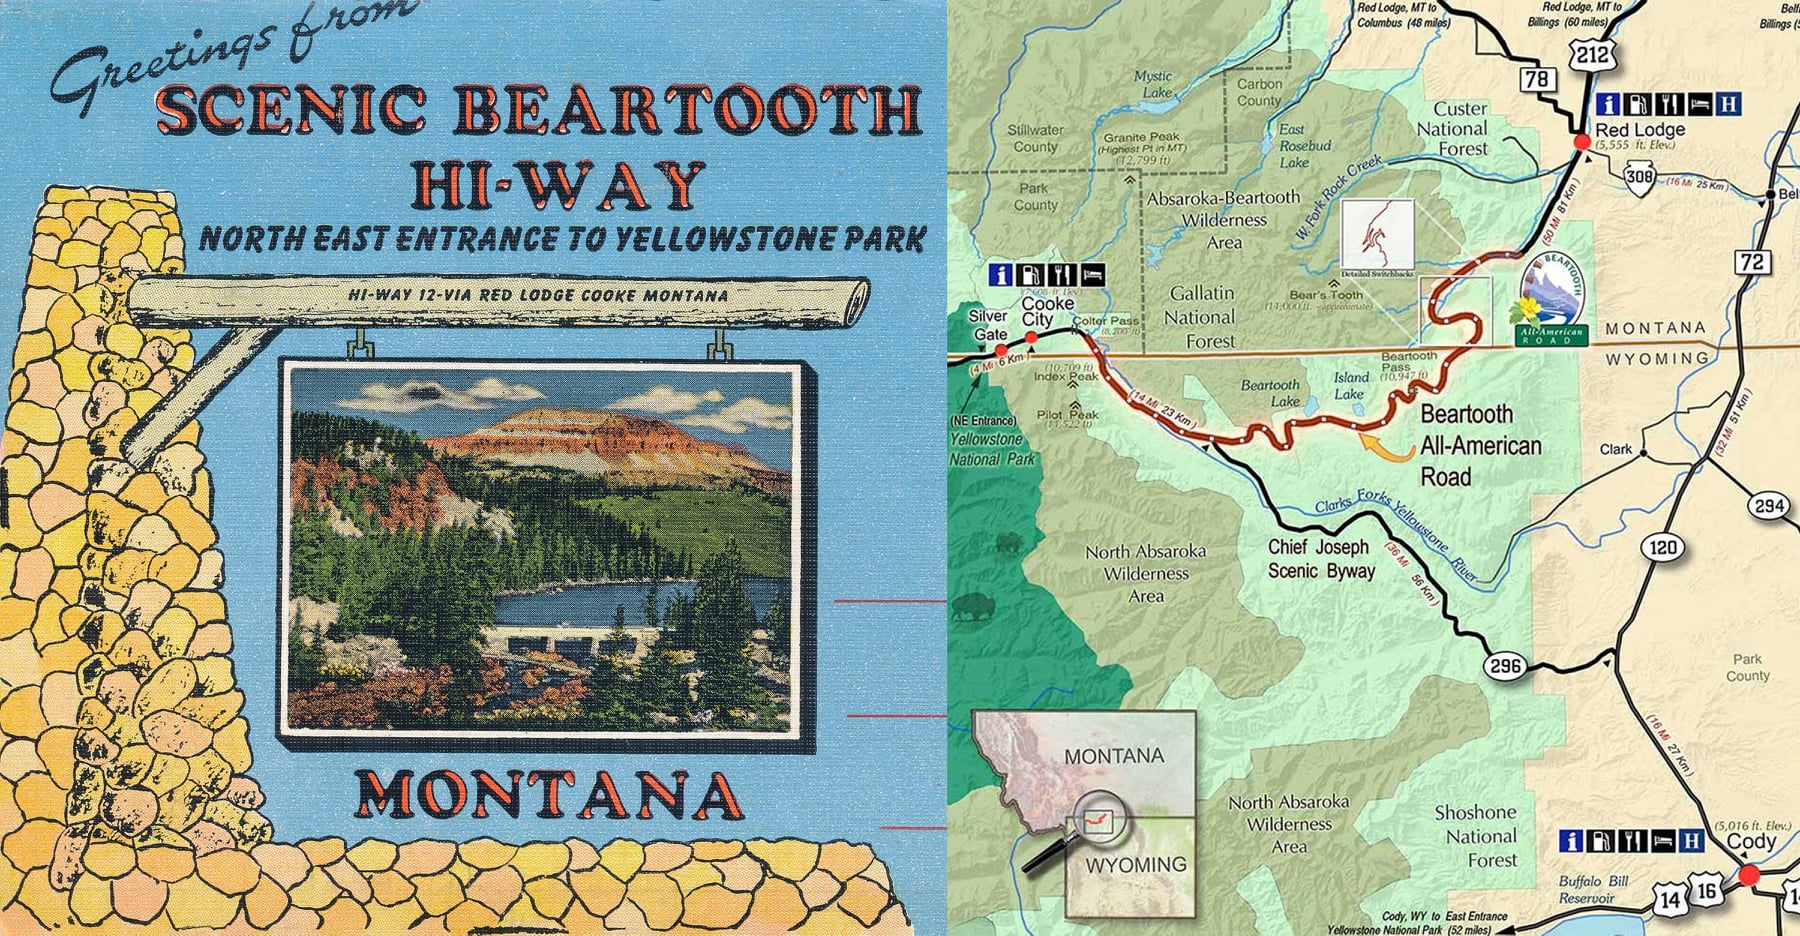 DR. PATRICK’S POSTCARD ROADSIDE: Beartooth Highway to Yellowstone, Montanna-Wyoming